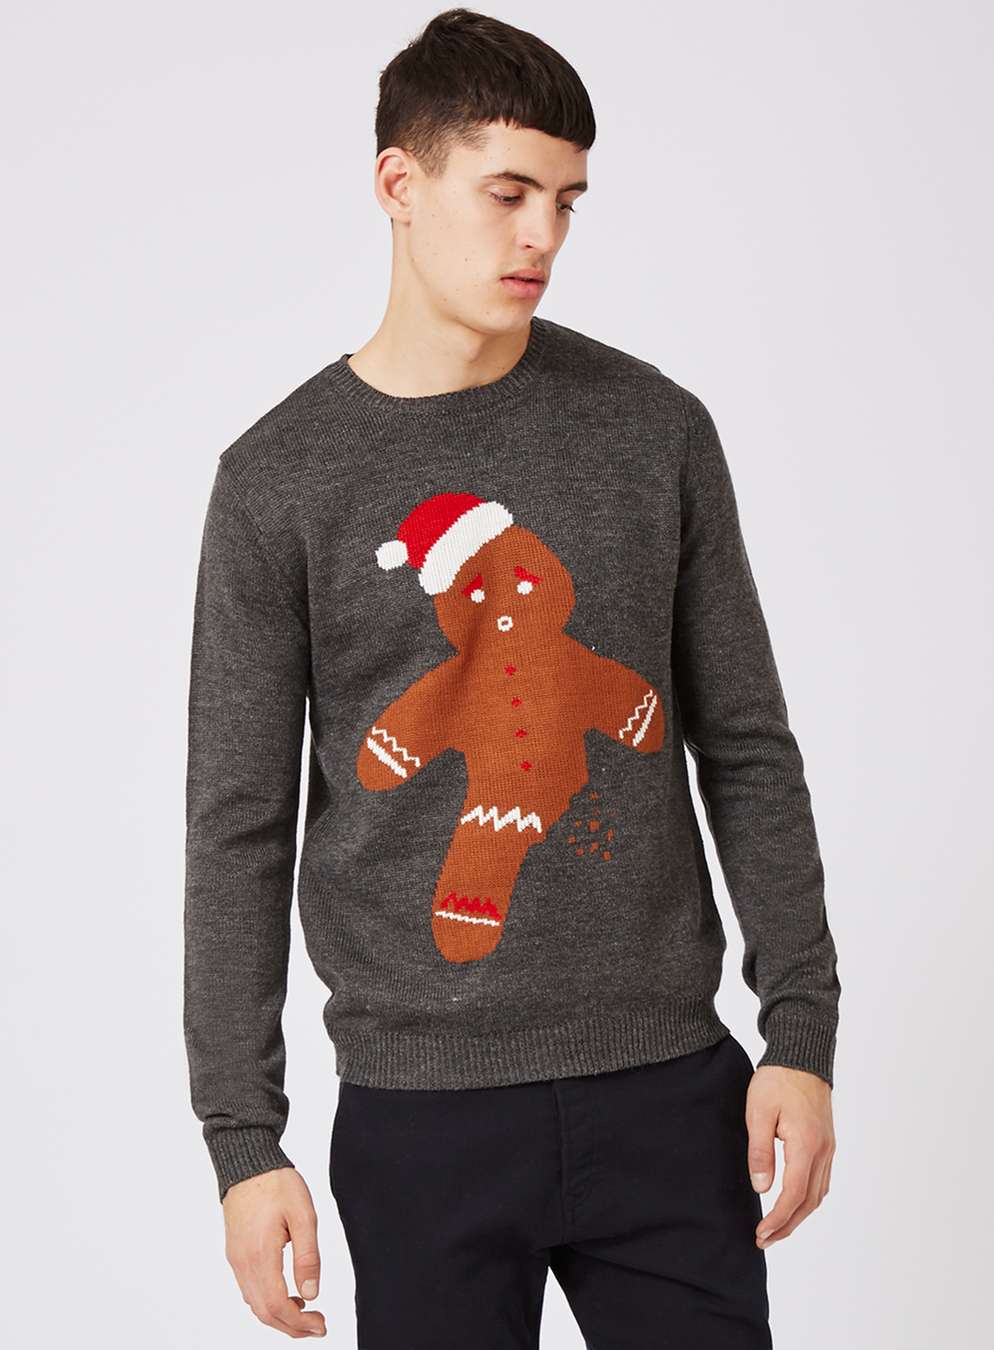 New Mens Jumpers Christmas  Xmas Knitted  Snowman Top 2016 IMT153 